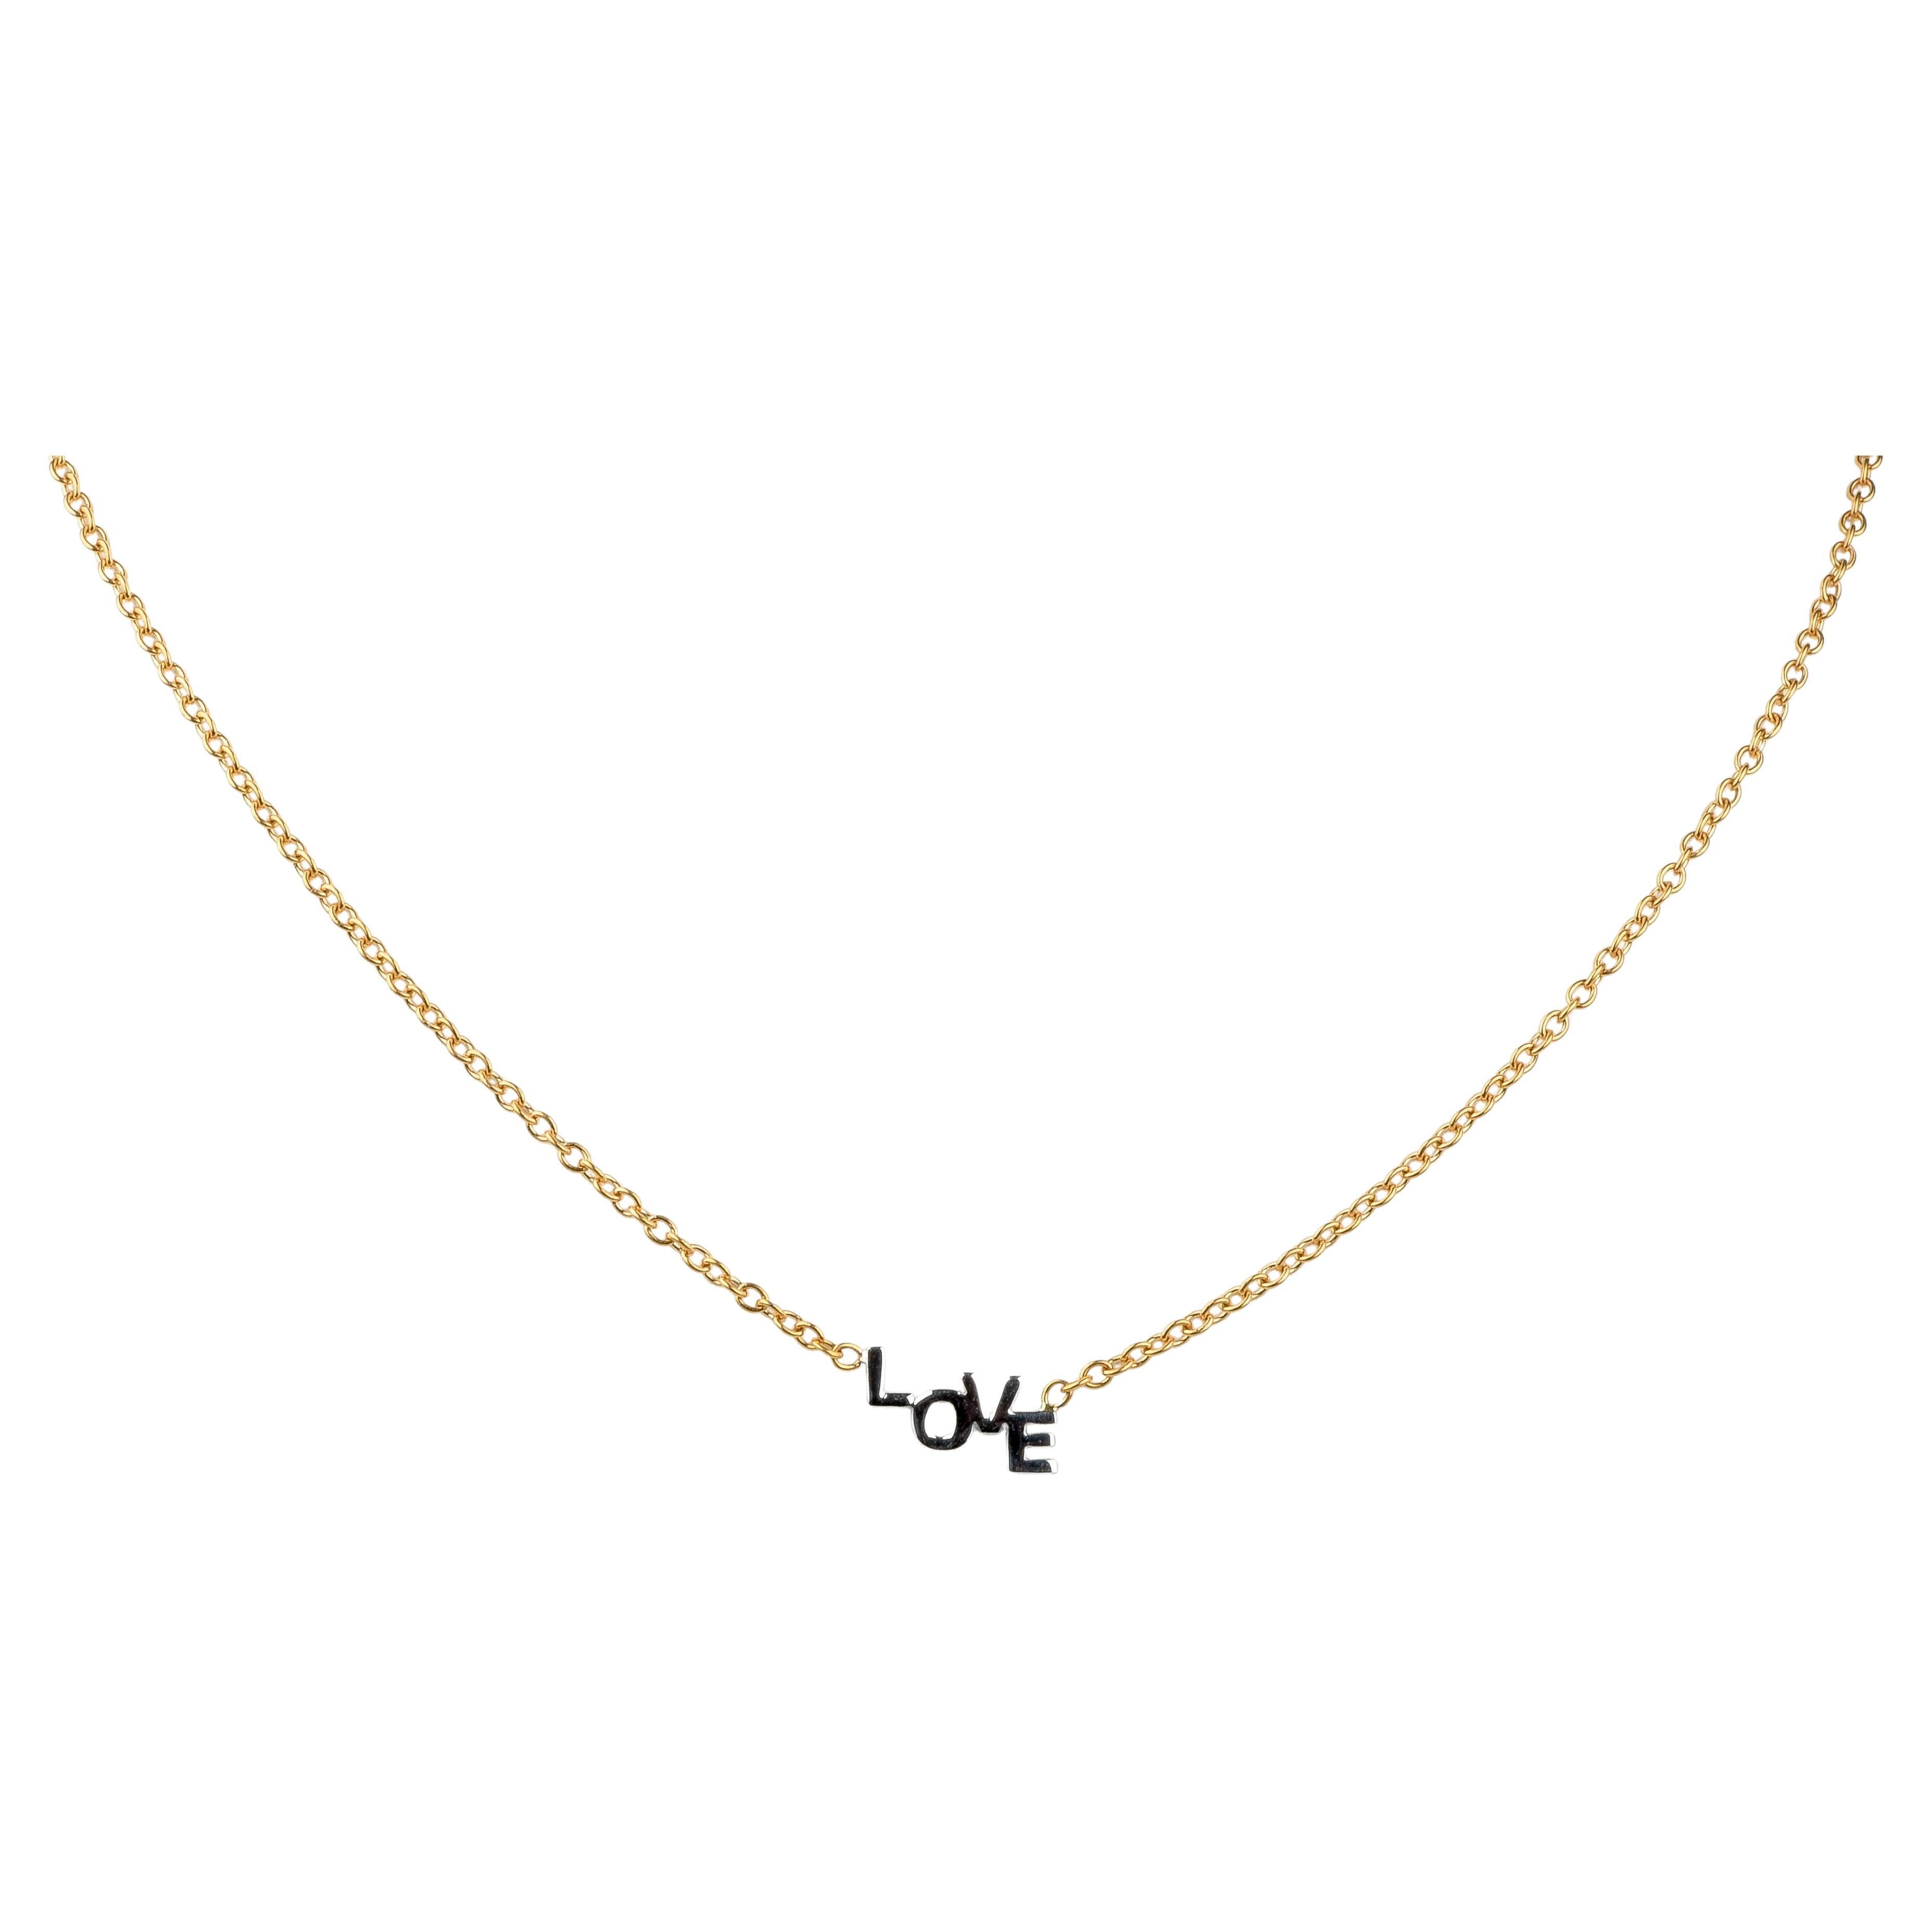 18 carats yellow and white gold Love necklace